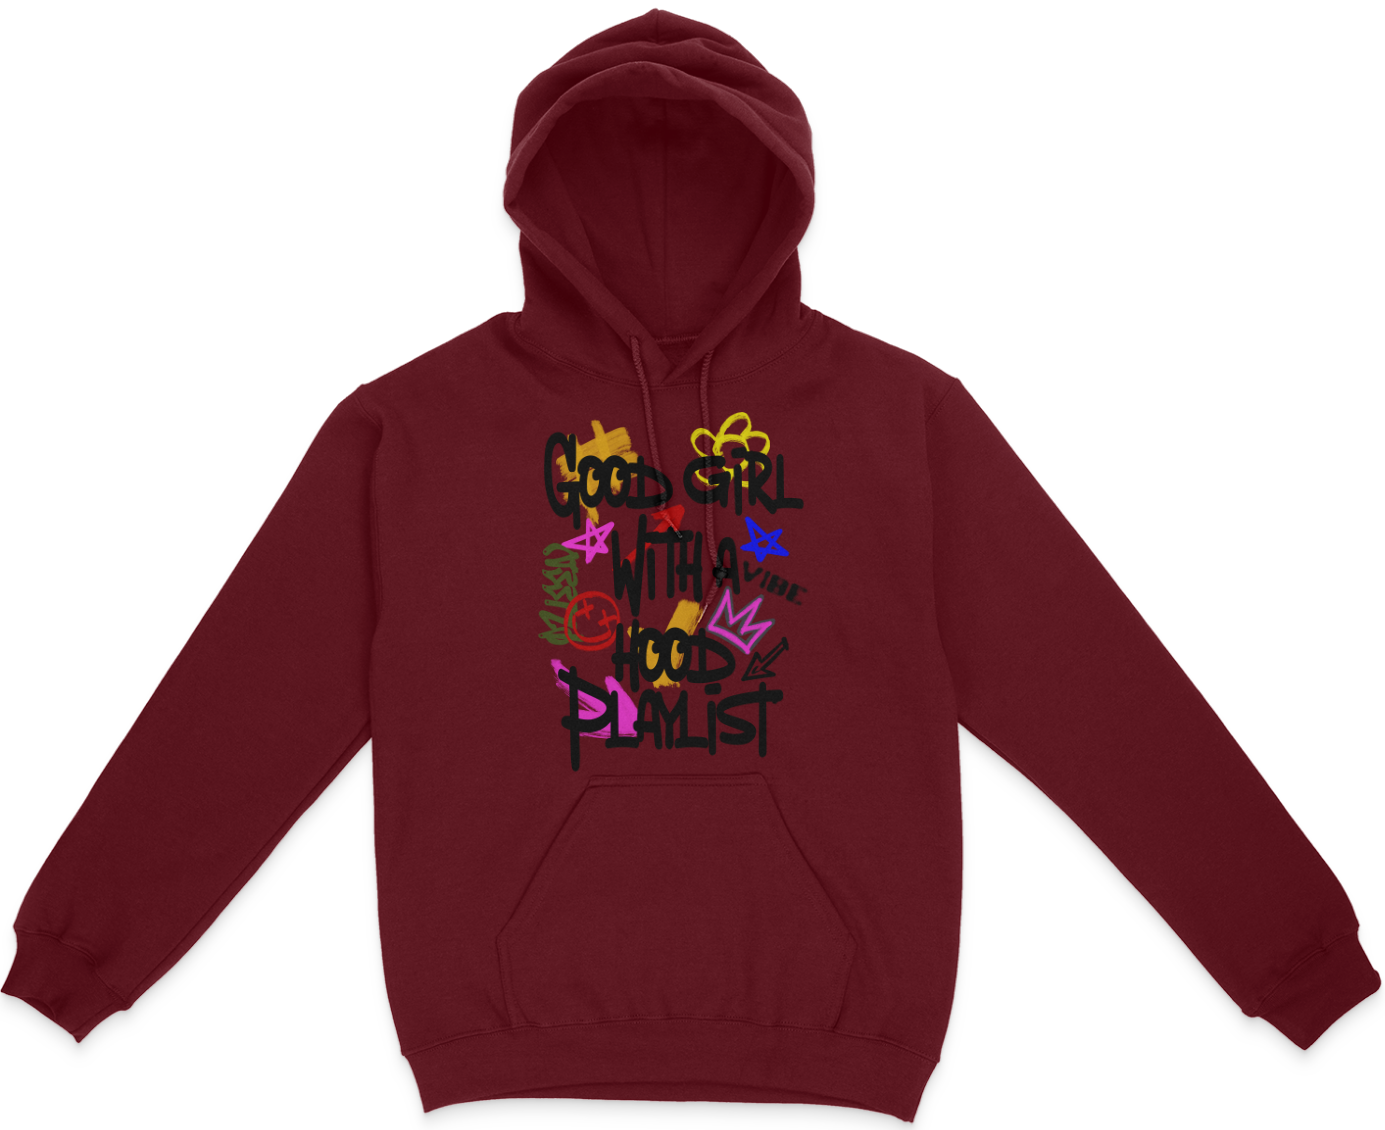 Good Girl With A Hood Playlist Graphic Unisex Hoodie